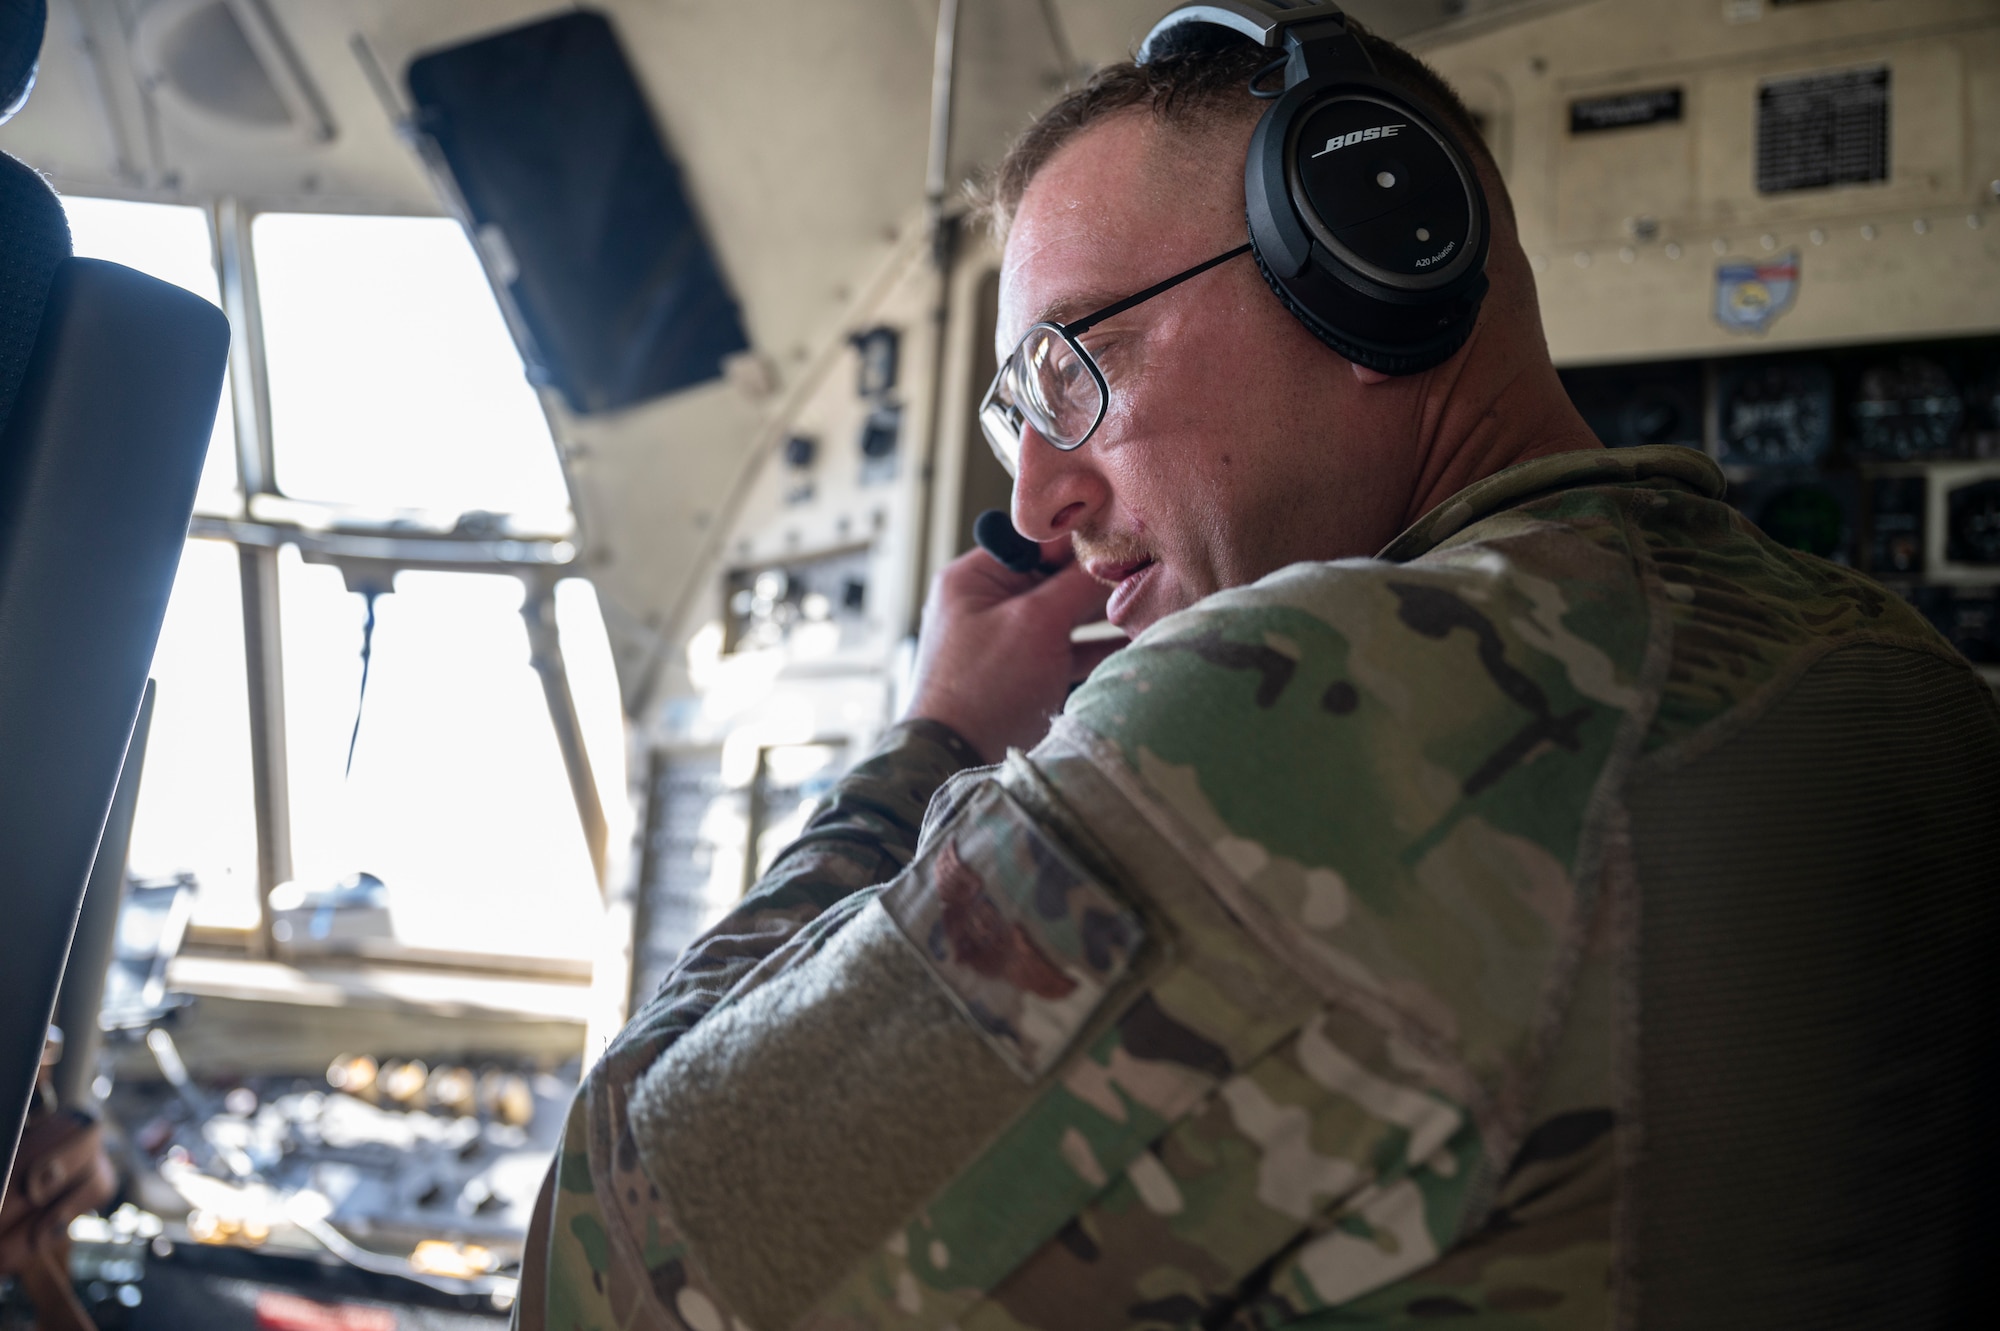 U.S. Air Force Capt. John-David Green, a navigator with the 779th Expeditionary Airlift Squadron, conducts pre-flight checks on a C-130H Hercules at Al Asad Air Base, Iraq, Sept. 16, 2021.